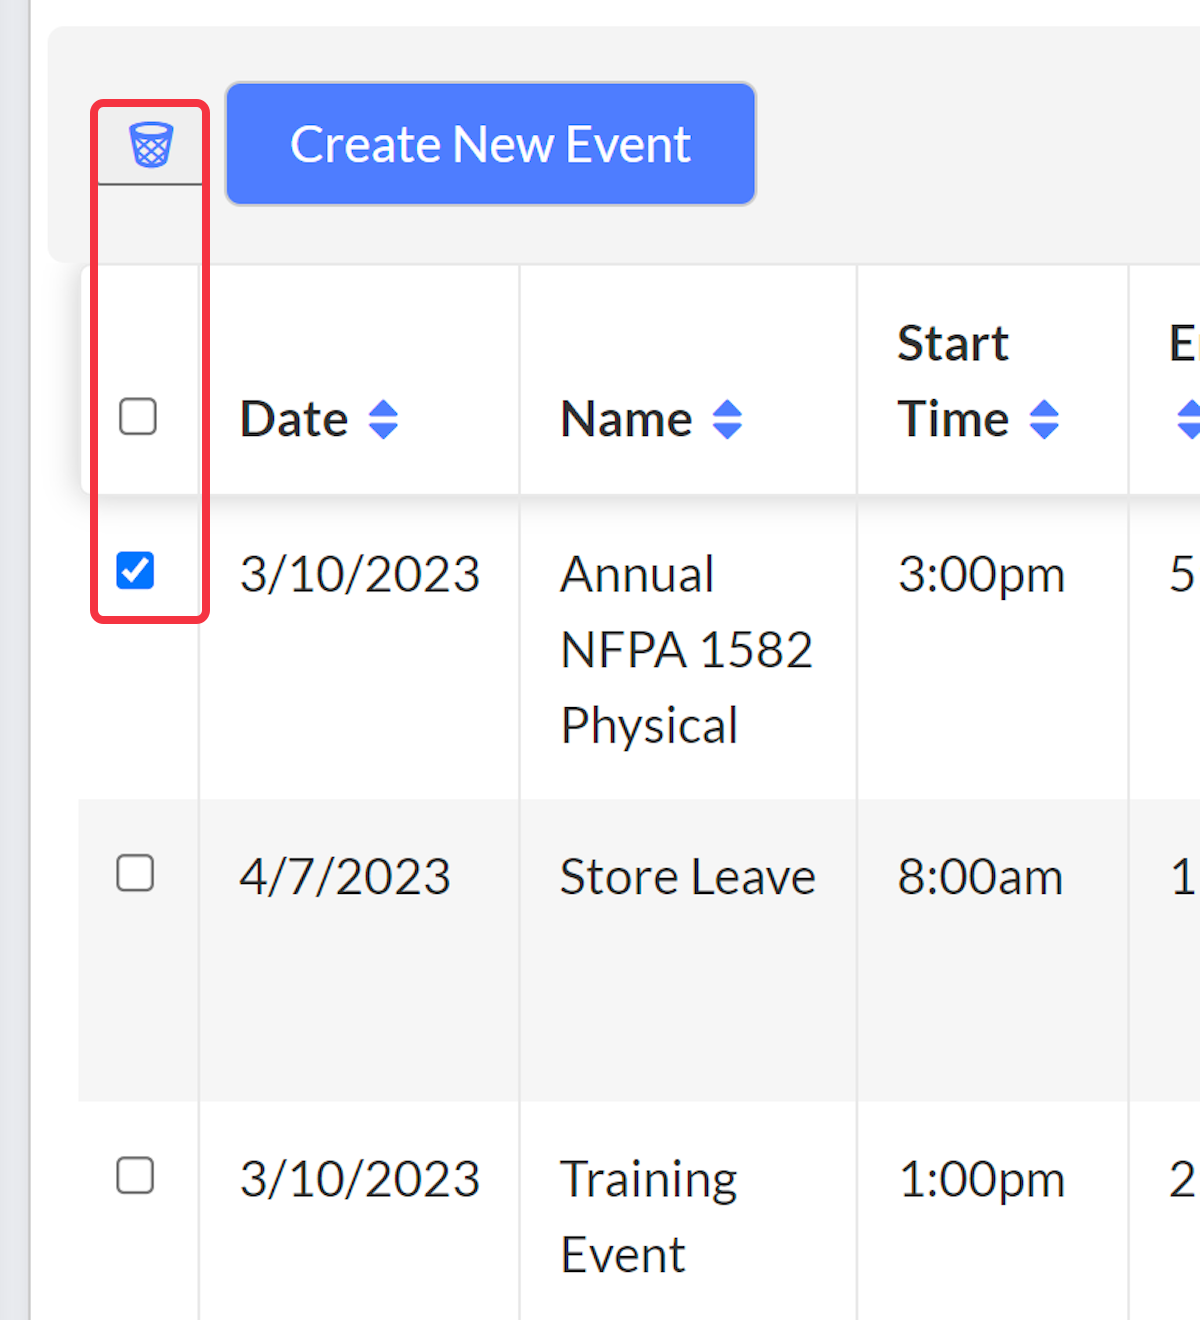 To bulk delete events with check boxes.